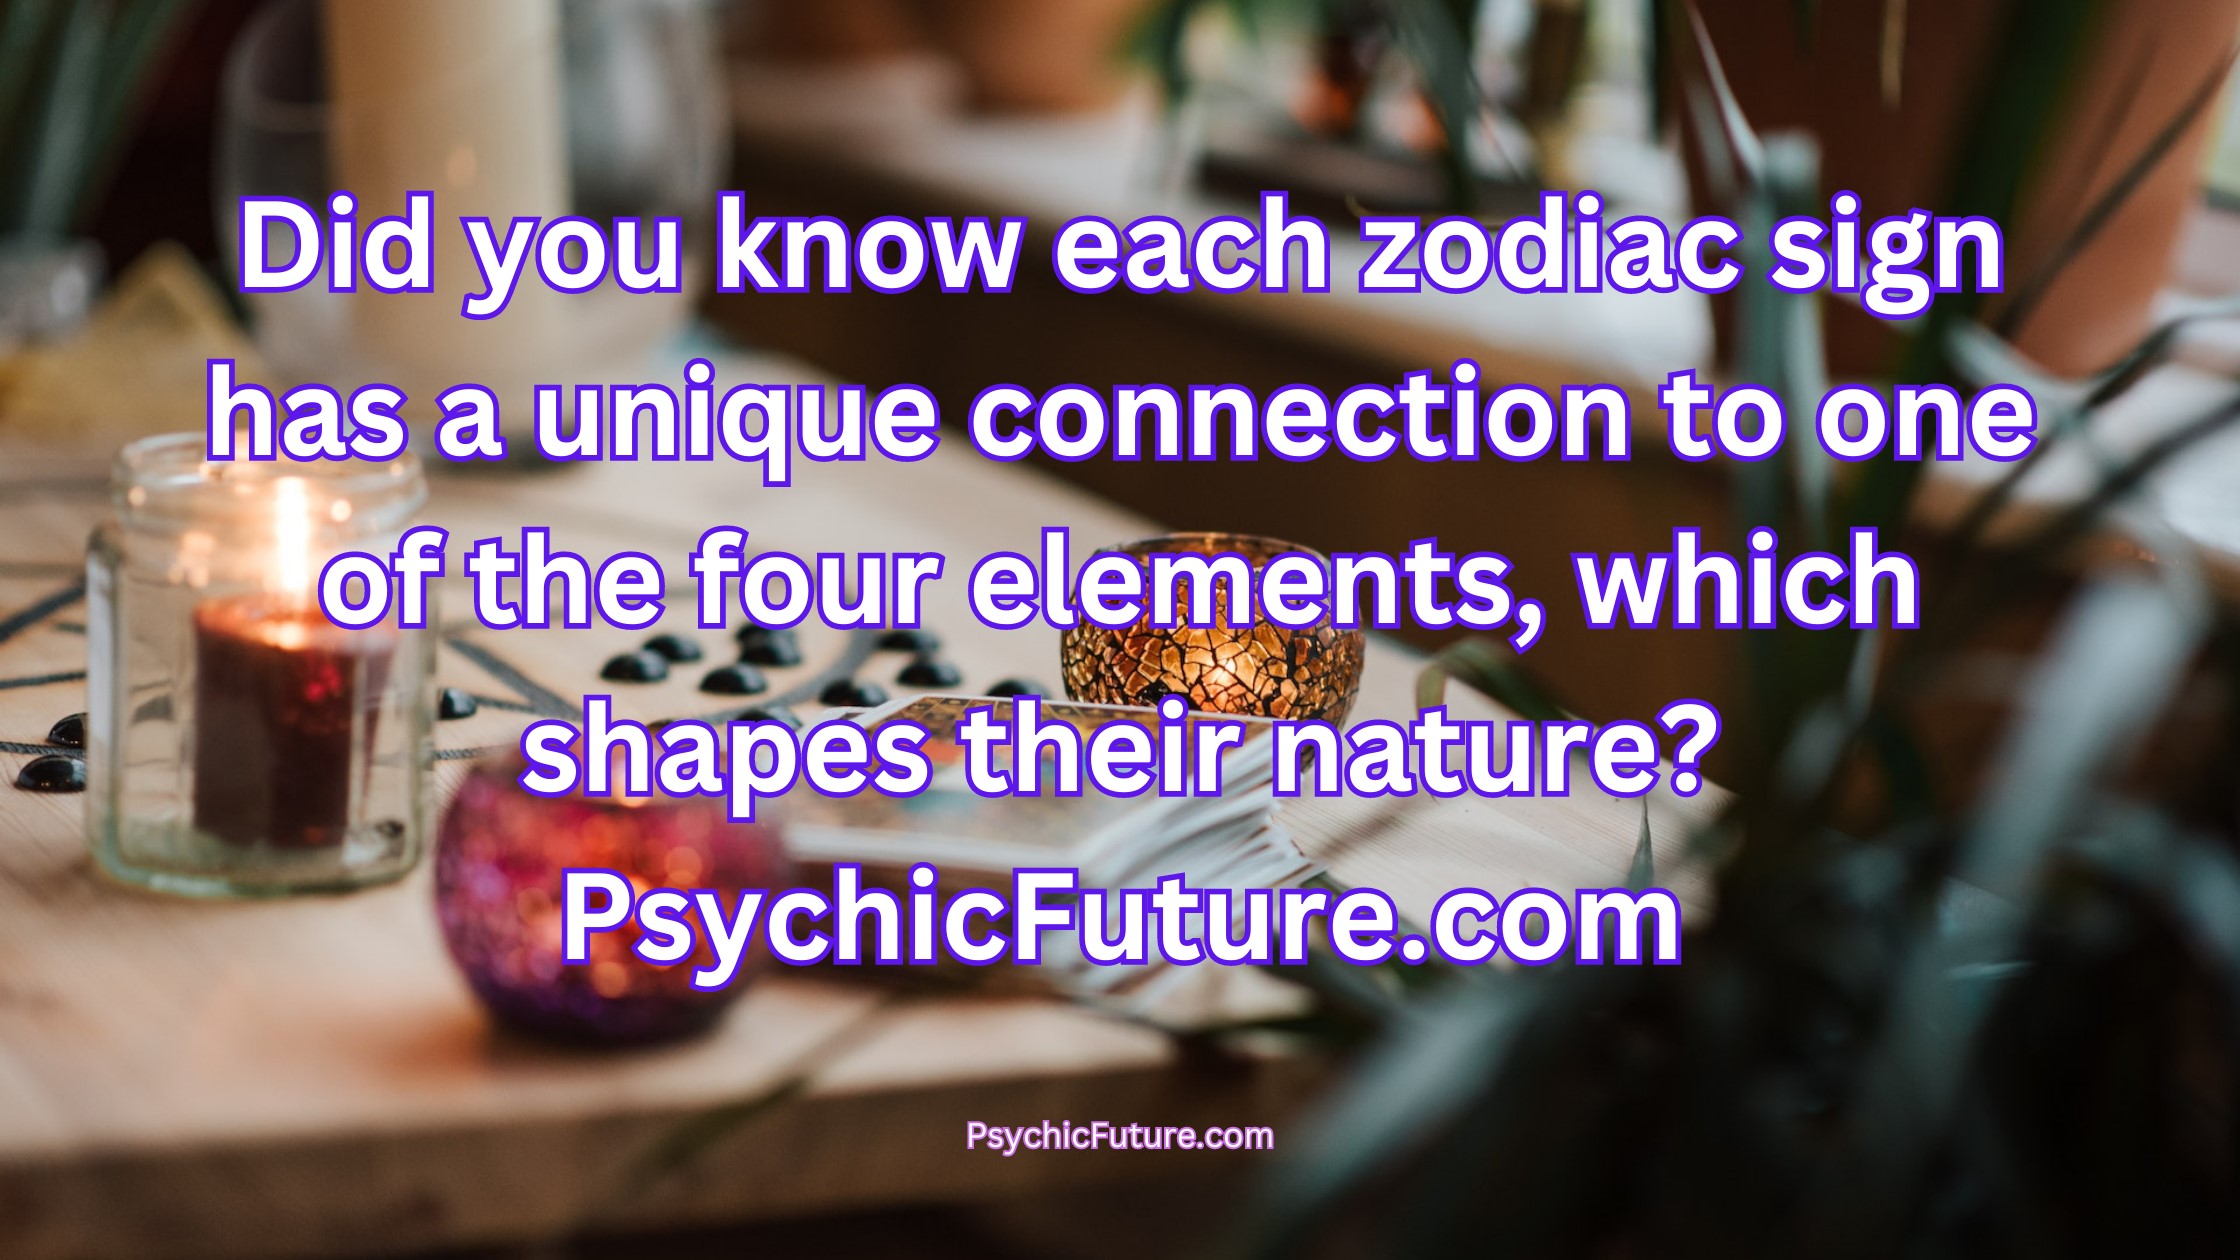 Did you know each zodiac sign has a unique connection to one of the four elements which shapes their nature